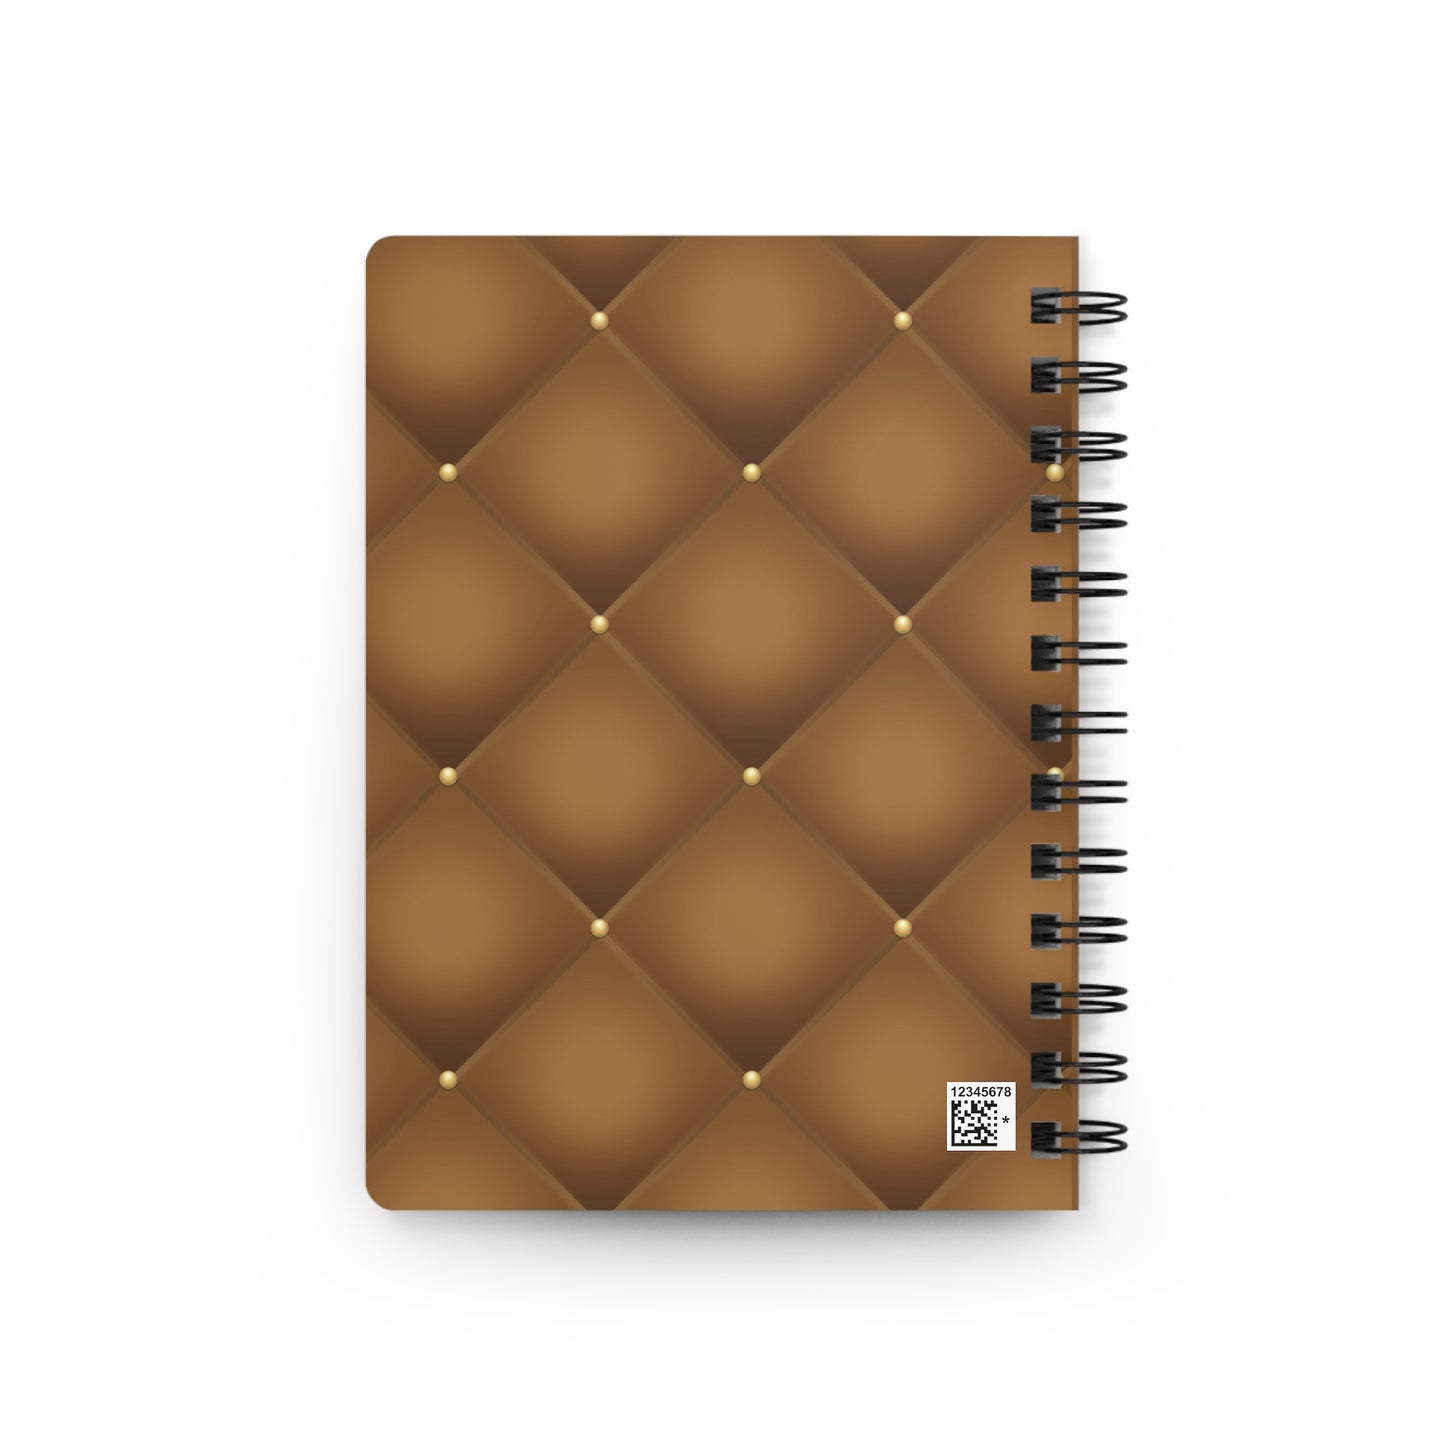 Stop for one minute Tufted Print Dark Moderate Orange and Gold Spiral Bound Journal